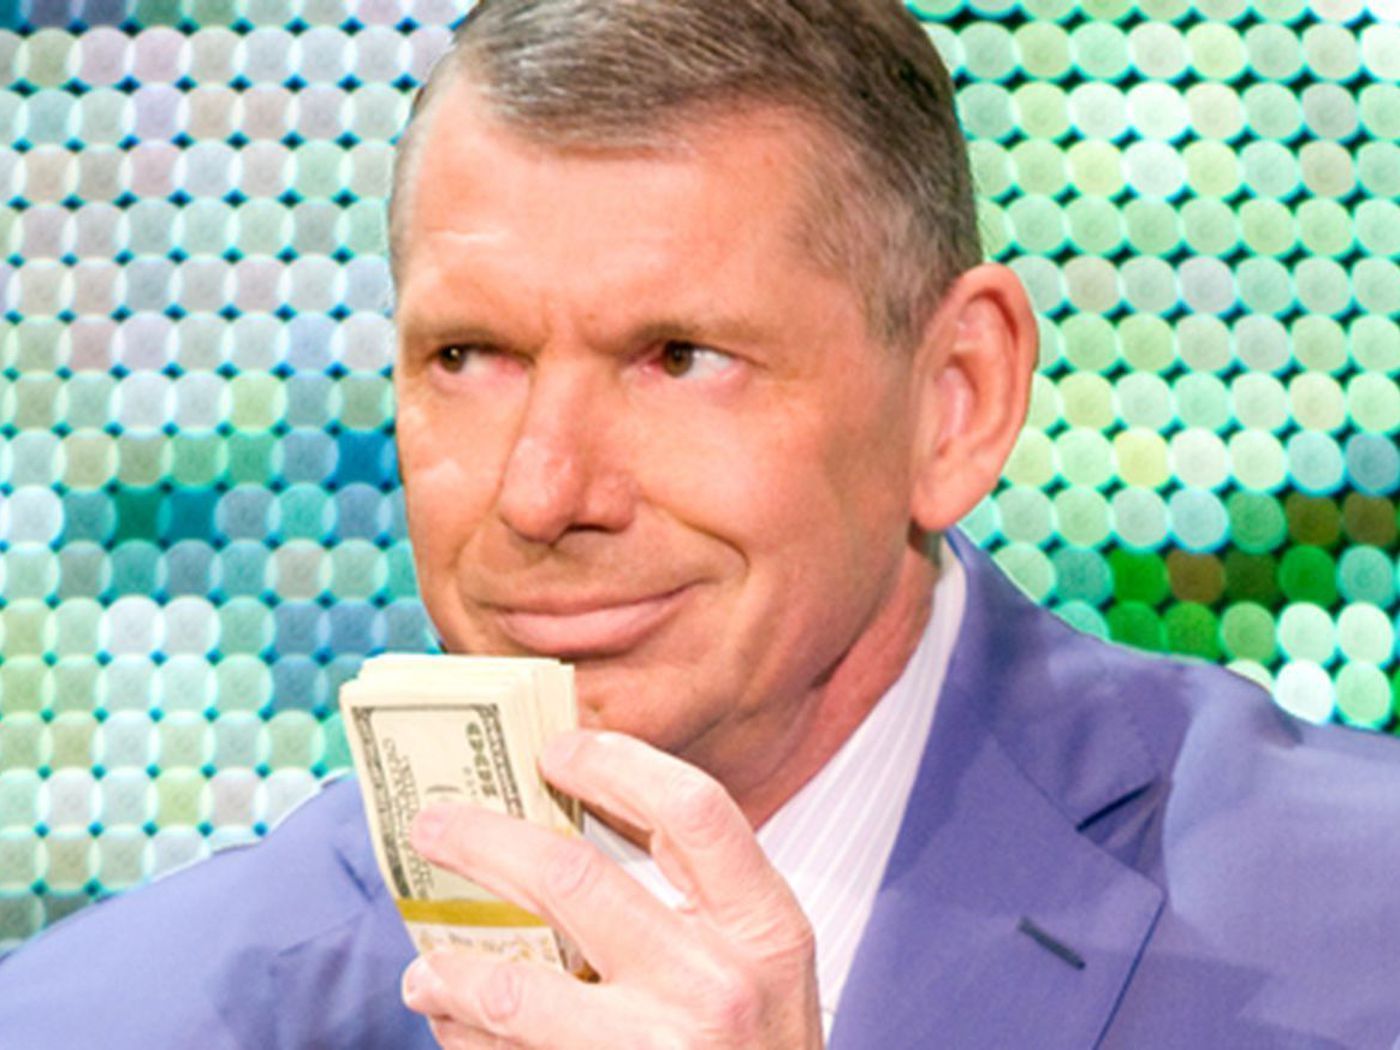 Vince McMahon knows a WWE Superstar when he sees one